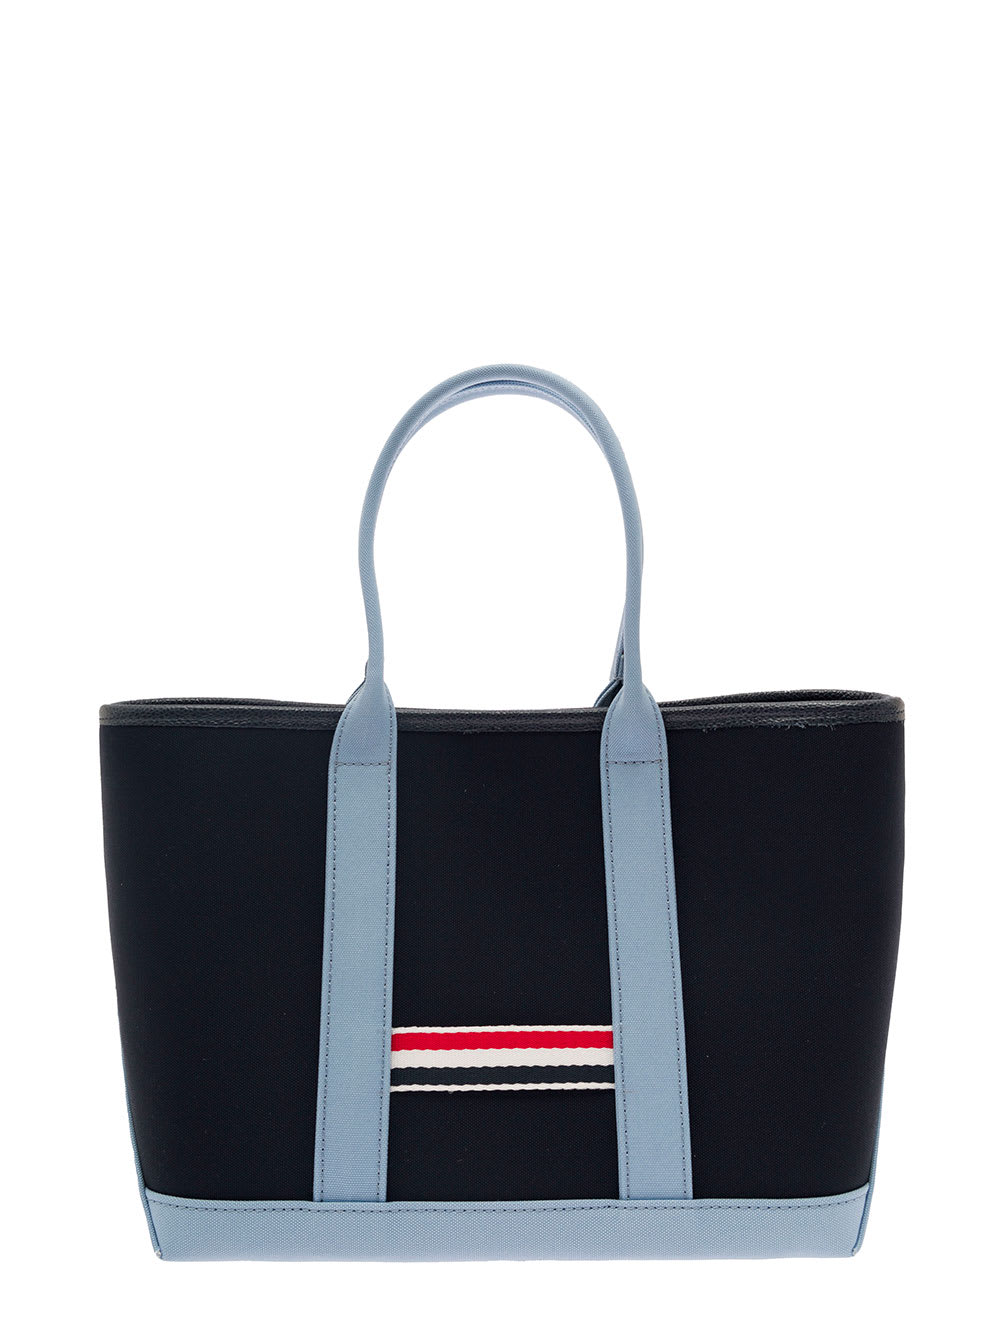 THOM BROWNE SMALL TOOL TOTE IN CANVAS W/ INTERLOCK BACKING